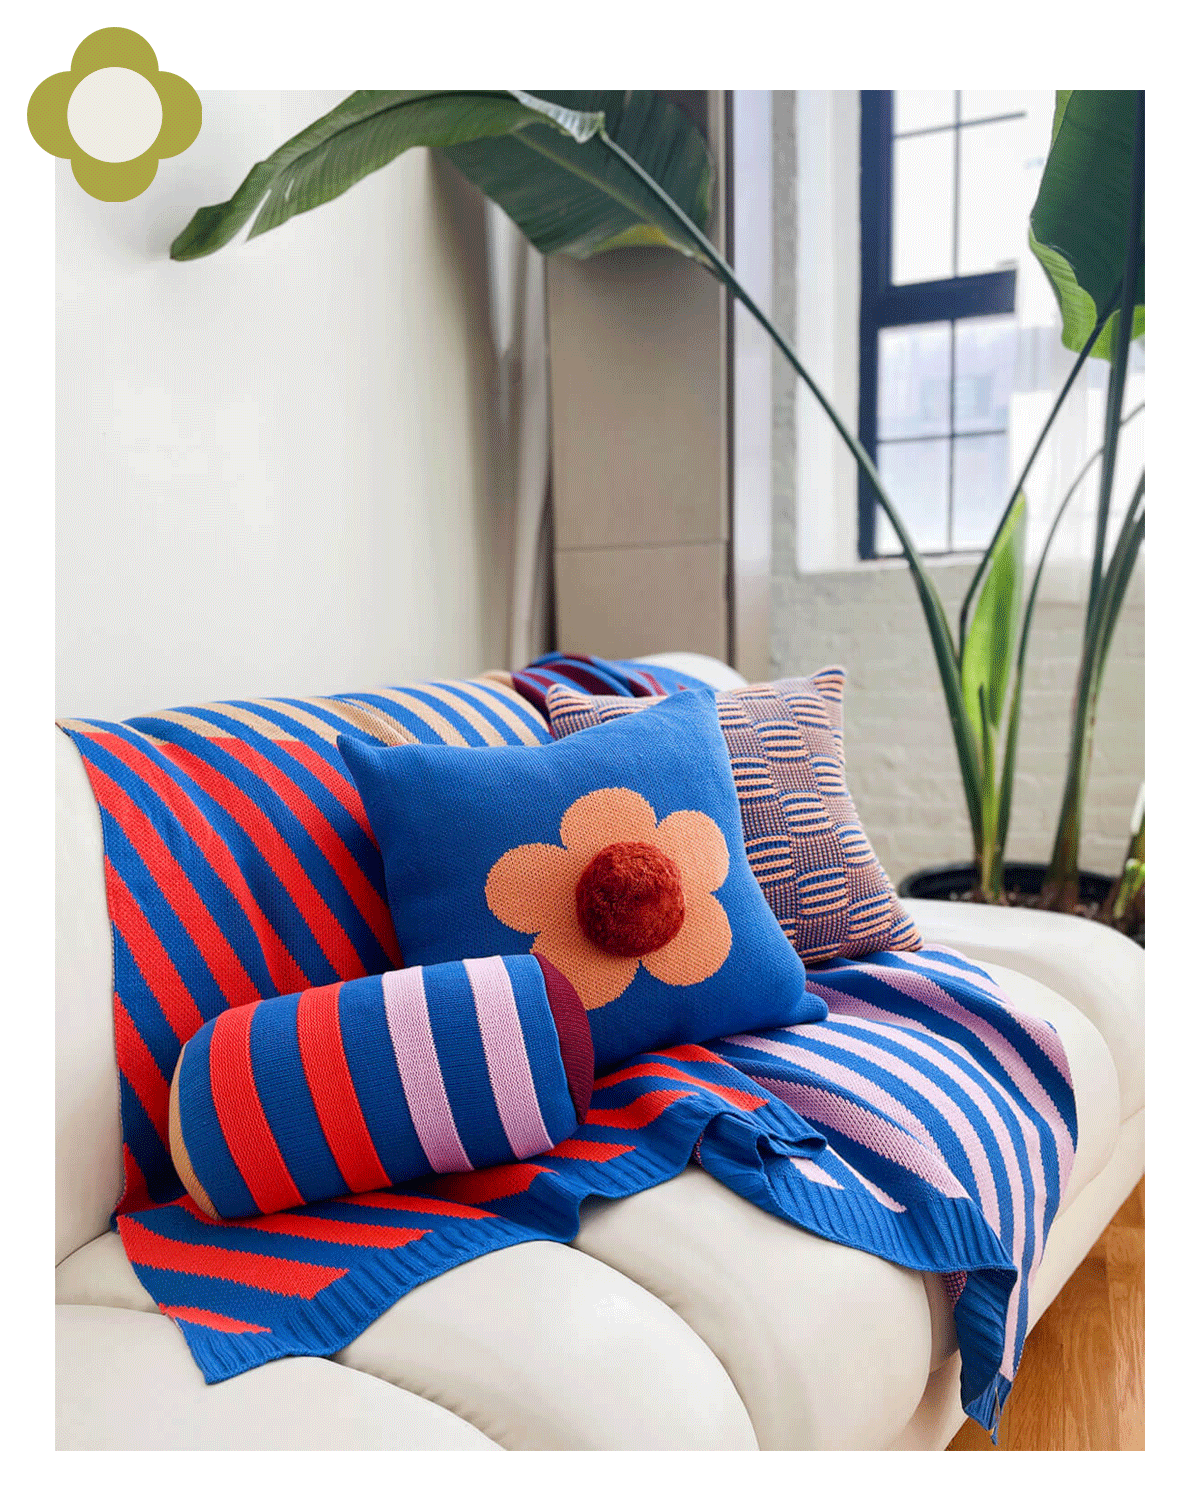 sofa with red and blue stripe blanket and flower pillow